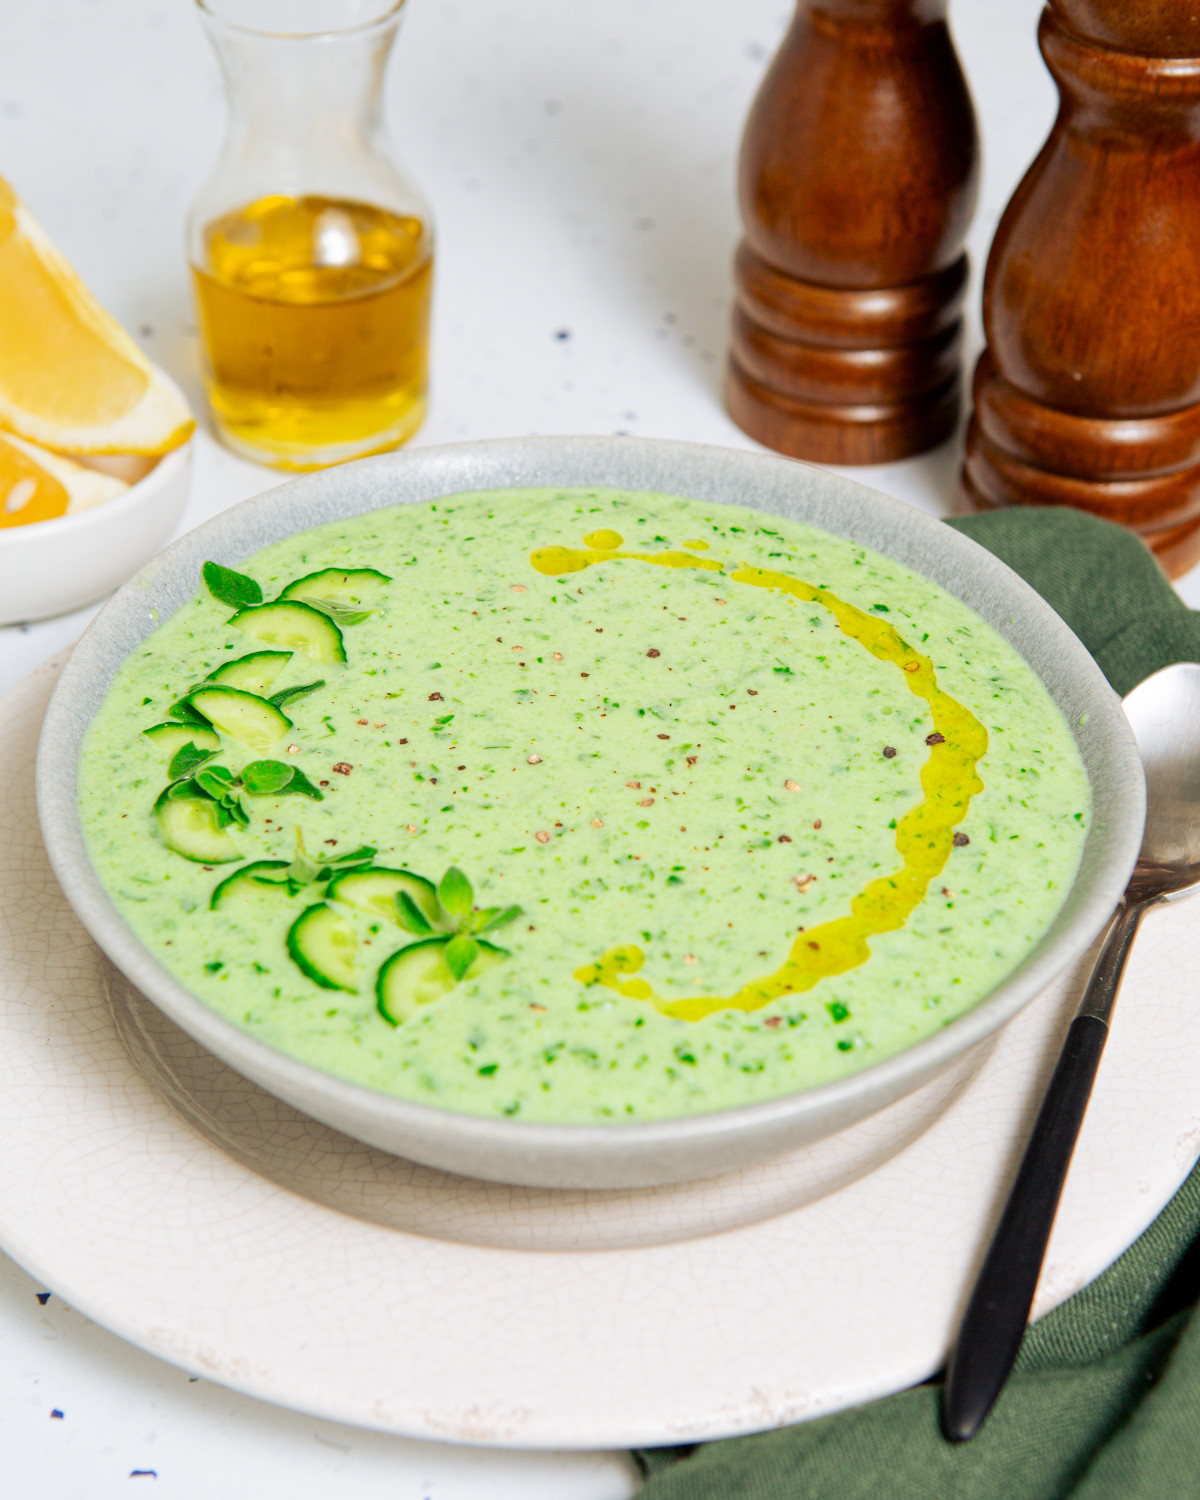 Cold cucumber soup in a white bowl garnished with sliced cucumbers and olive oil.